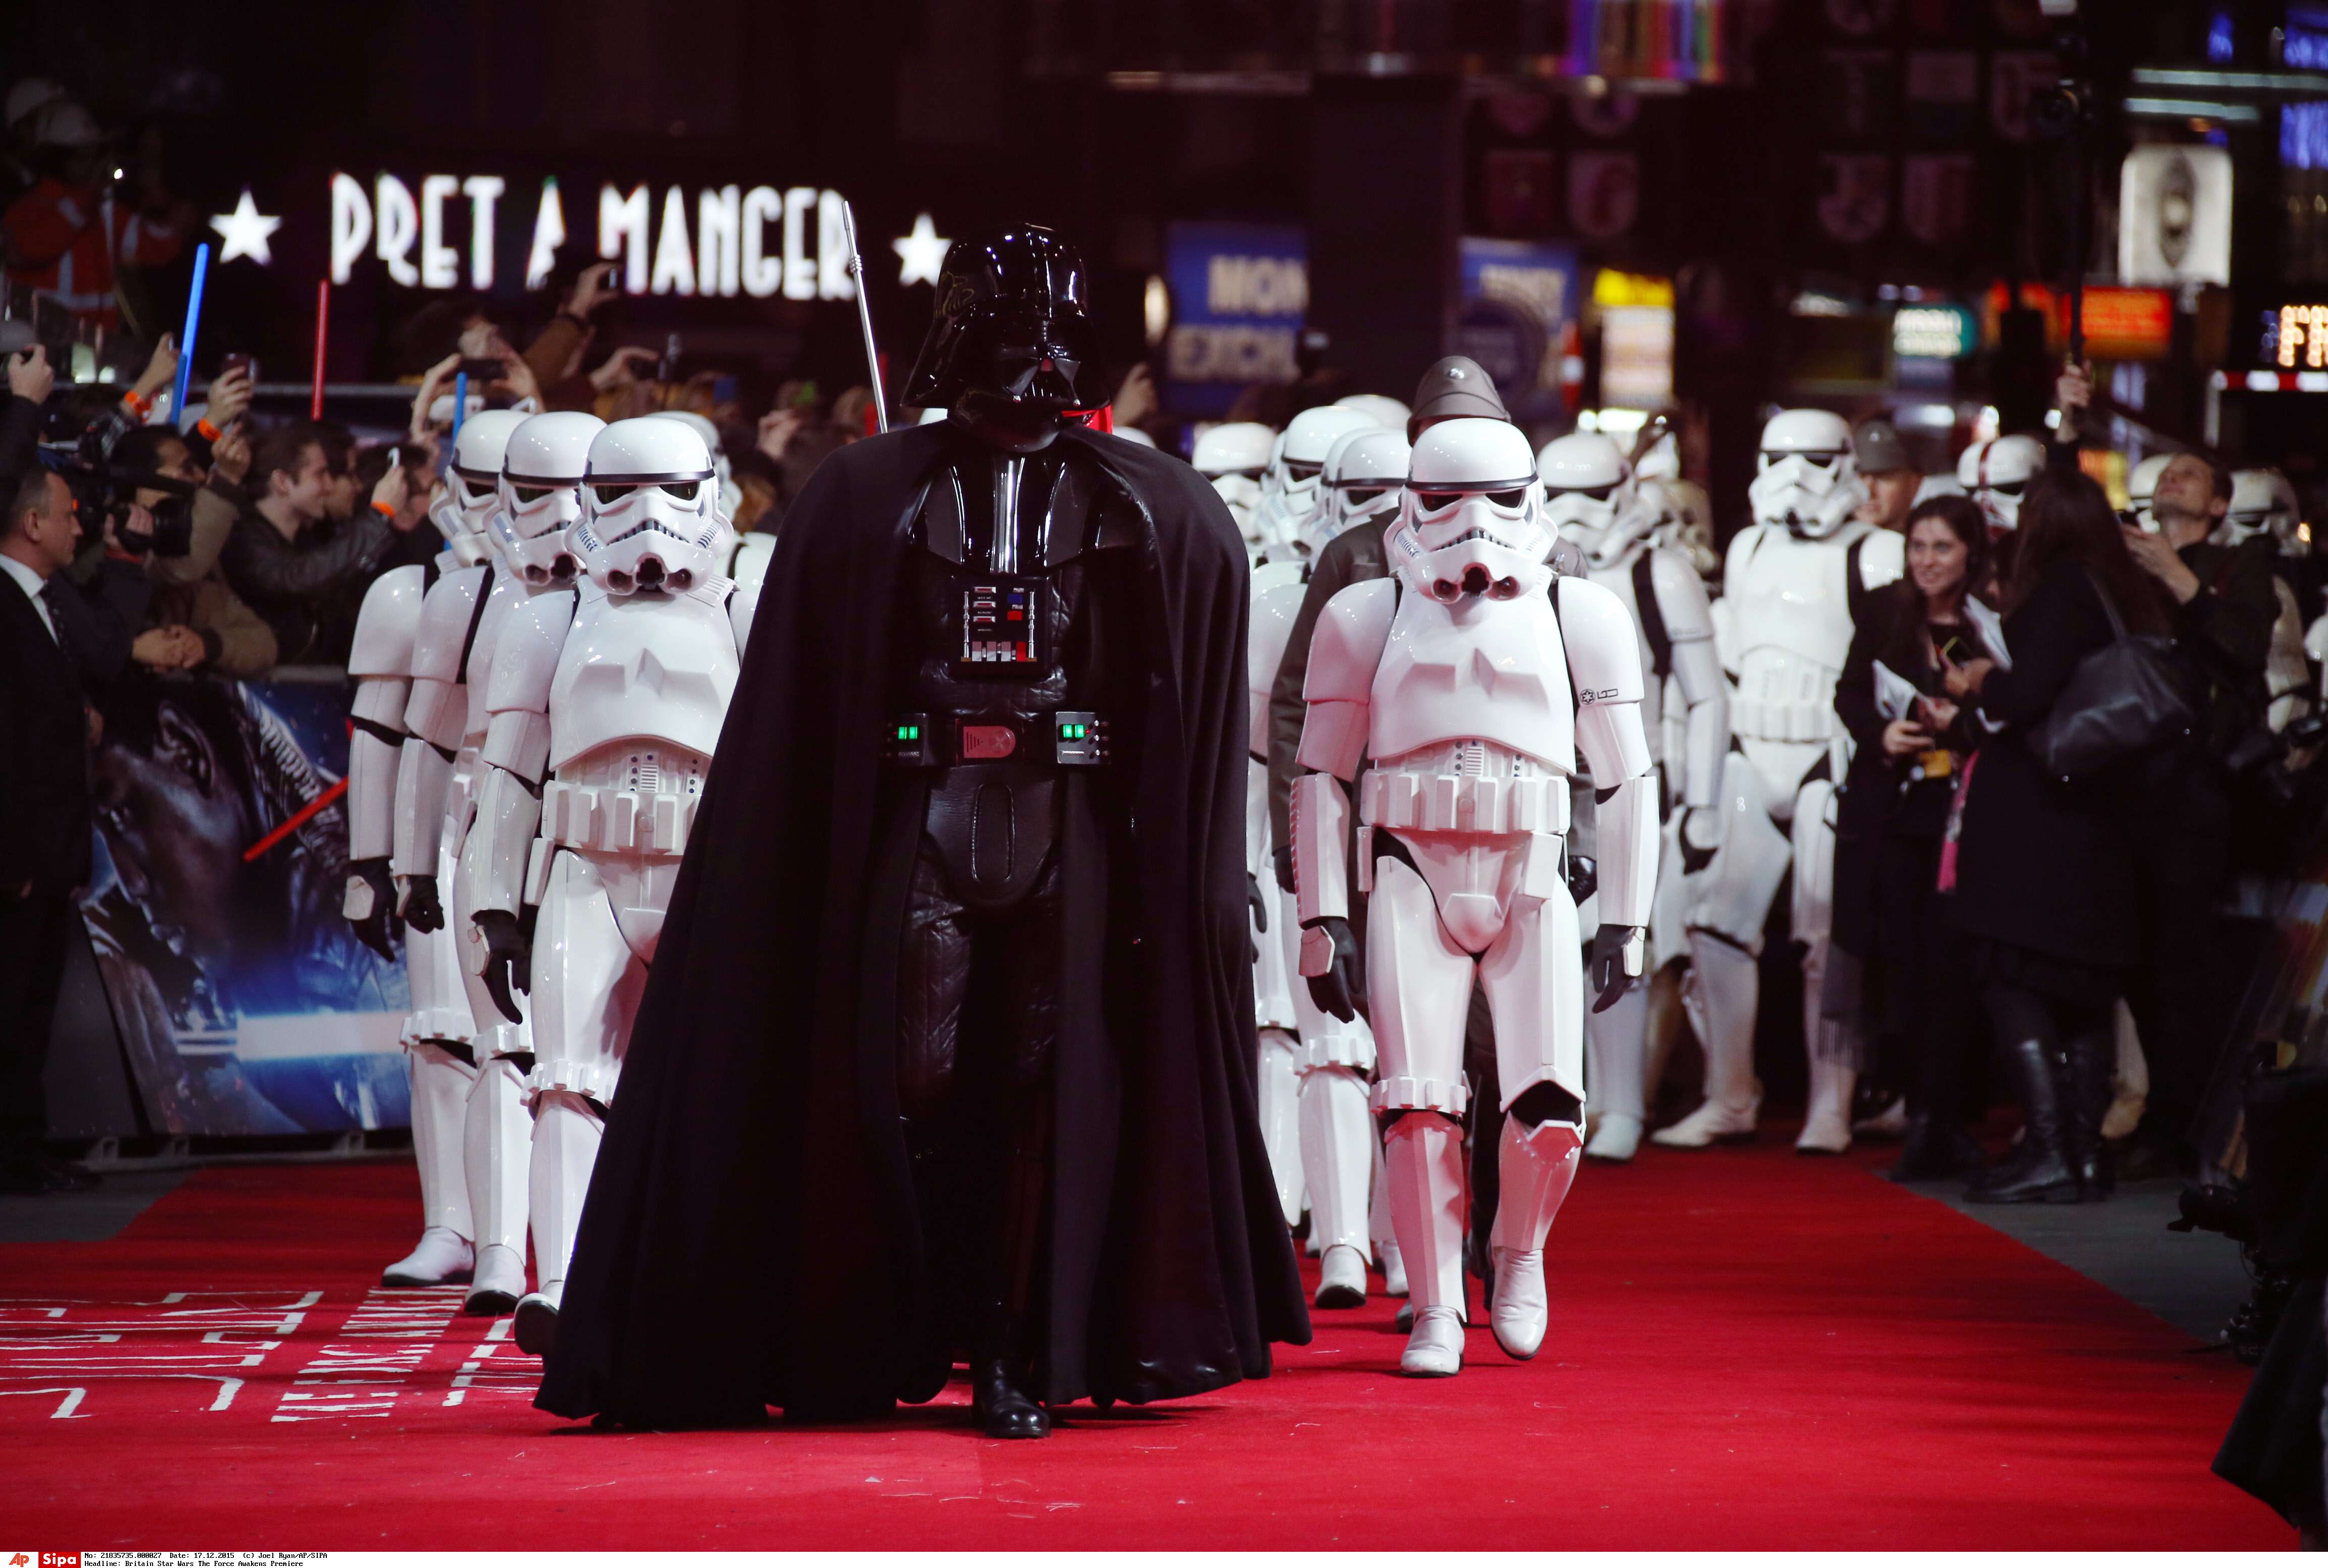 Actors dressed as Stormtroopers and Darth Vader arrive at the European premiere of the film 'Star Wars: The Force Awakens ' in London, Wednesday, Dec. 16, 2015. (Photo by Joel Ryan/Invision/AP)/LENT101/890882132897/21615113675, 21334631/1512170406